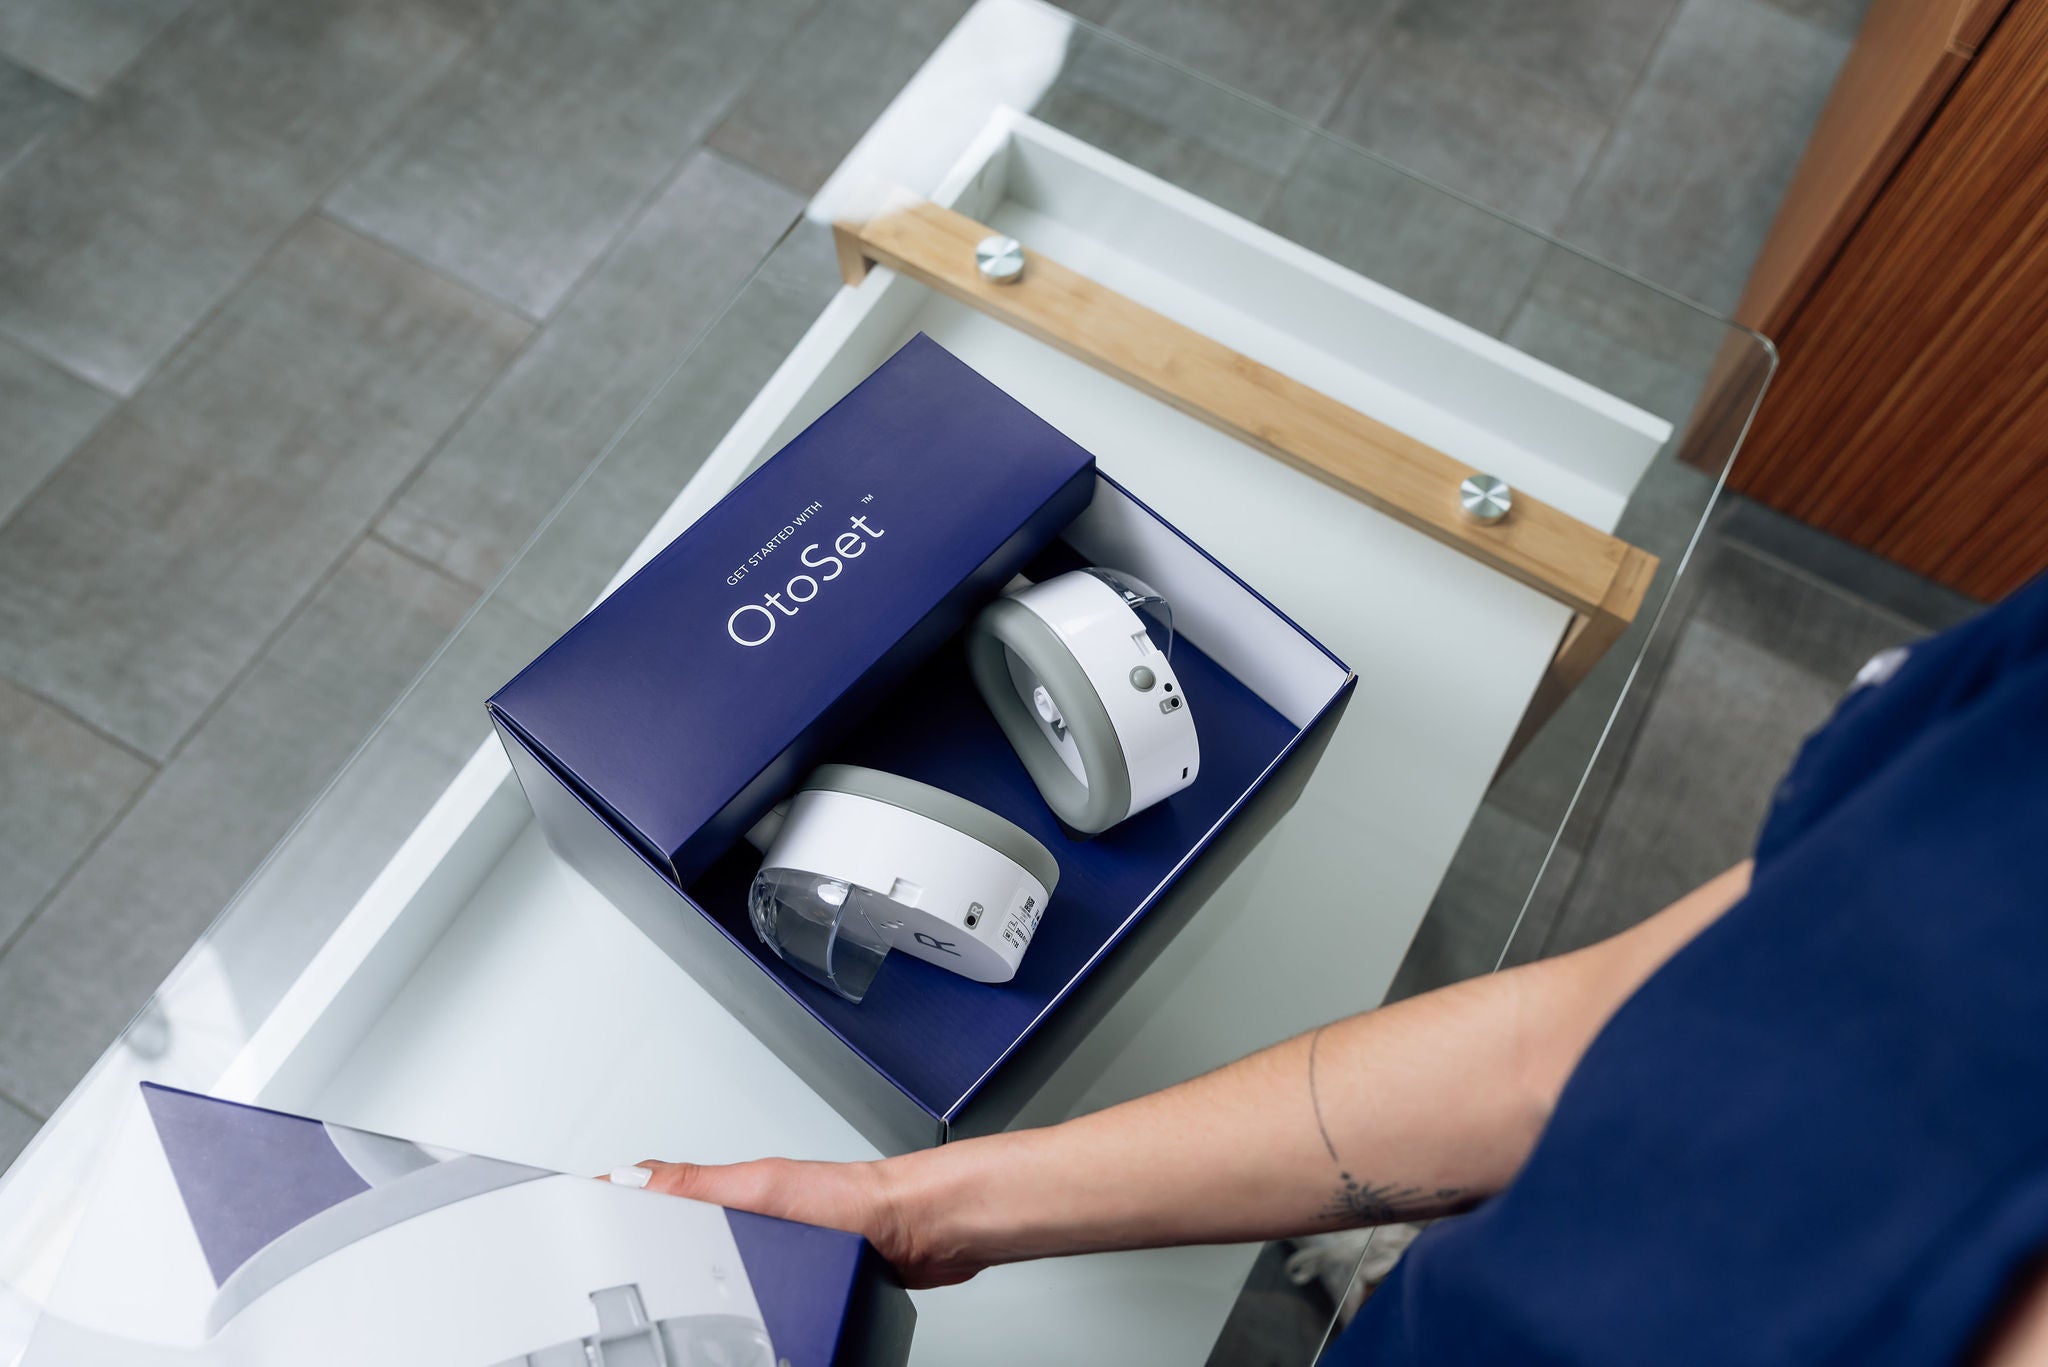 OtoSet automated ear cleaning system looks like a pair of headphones